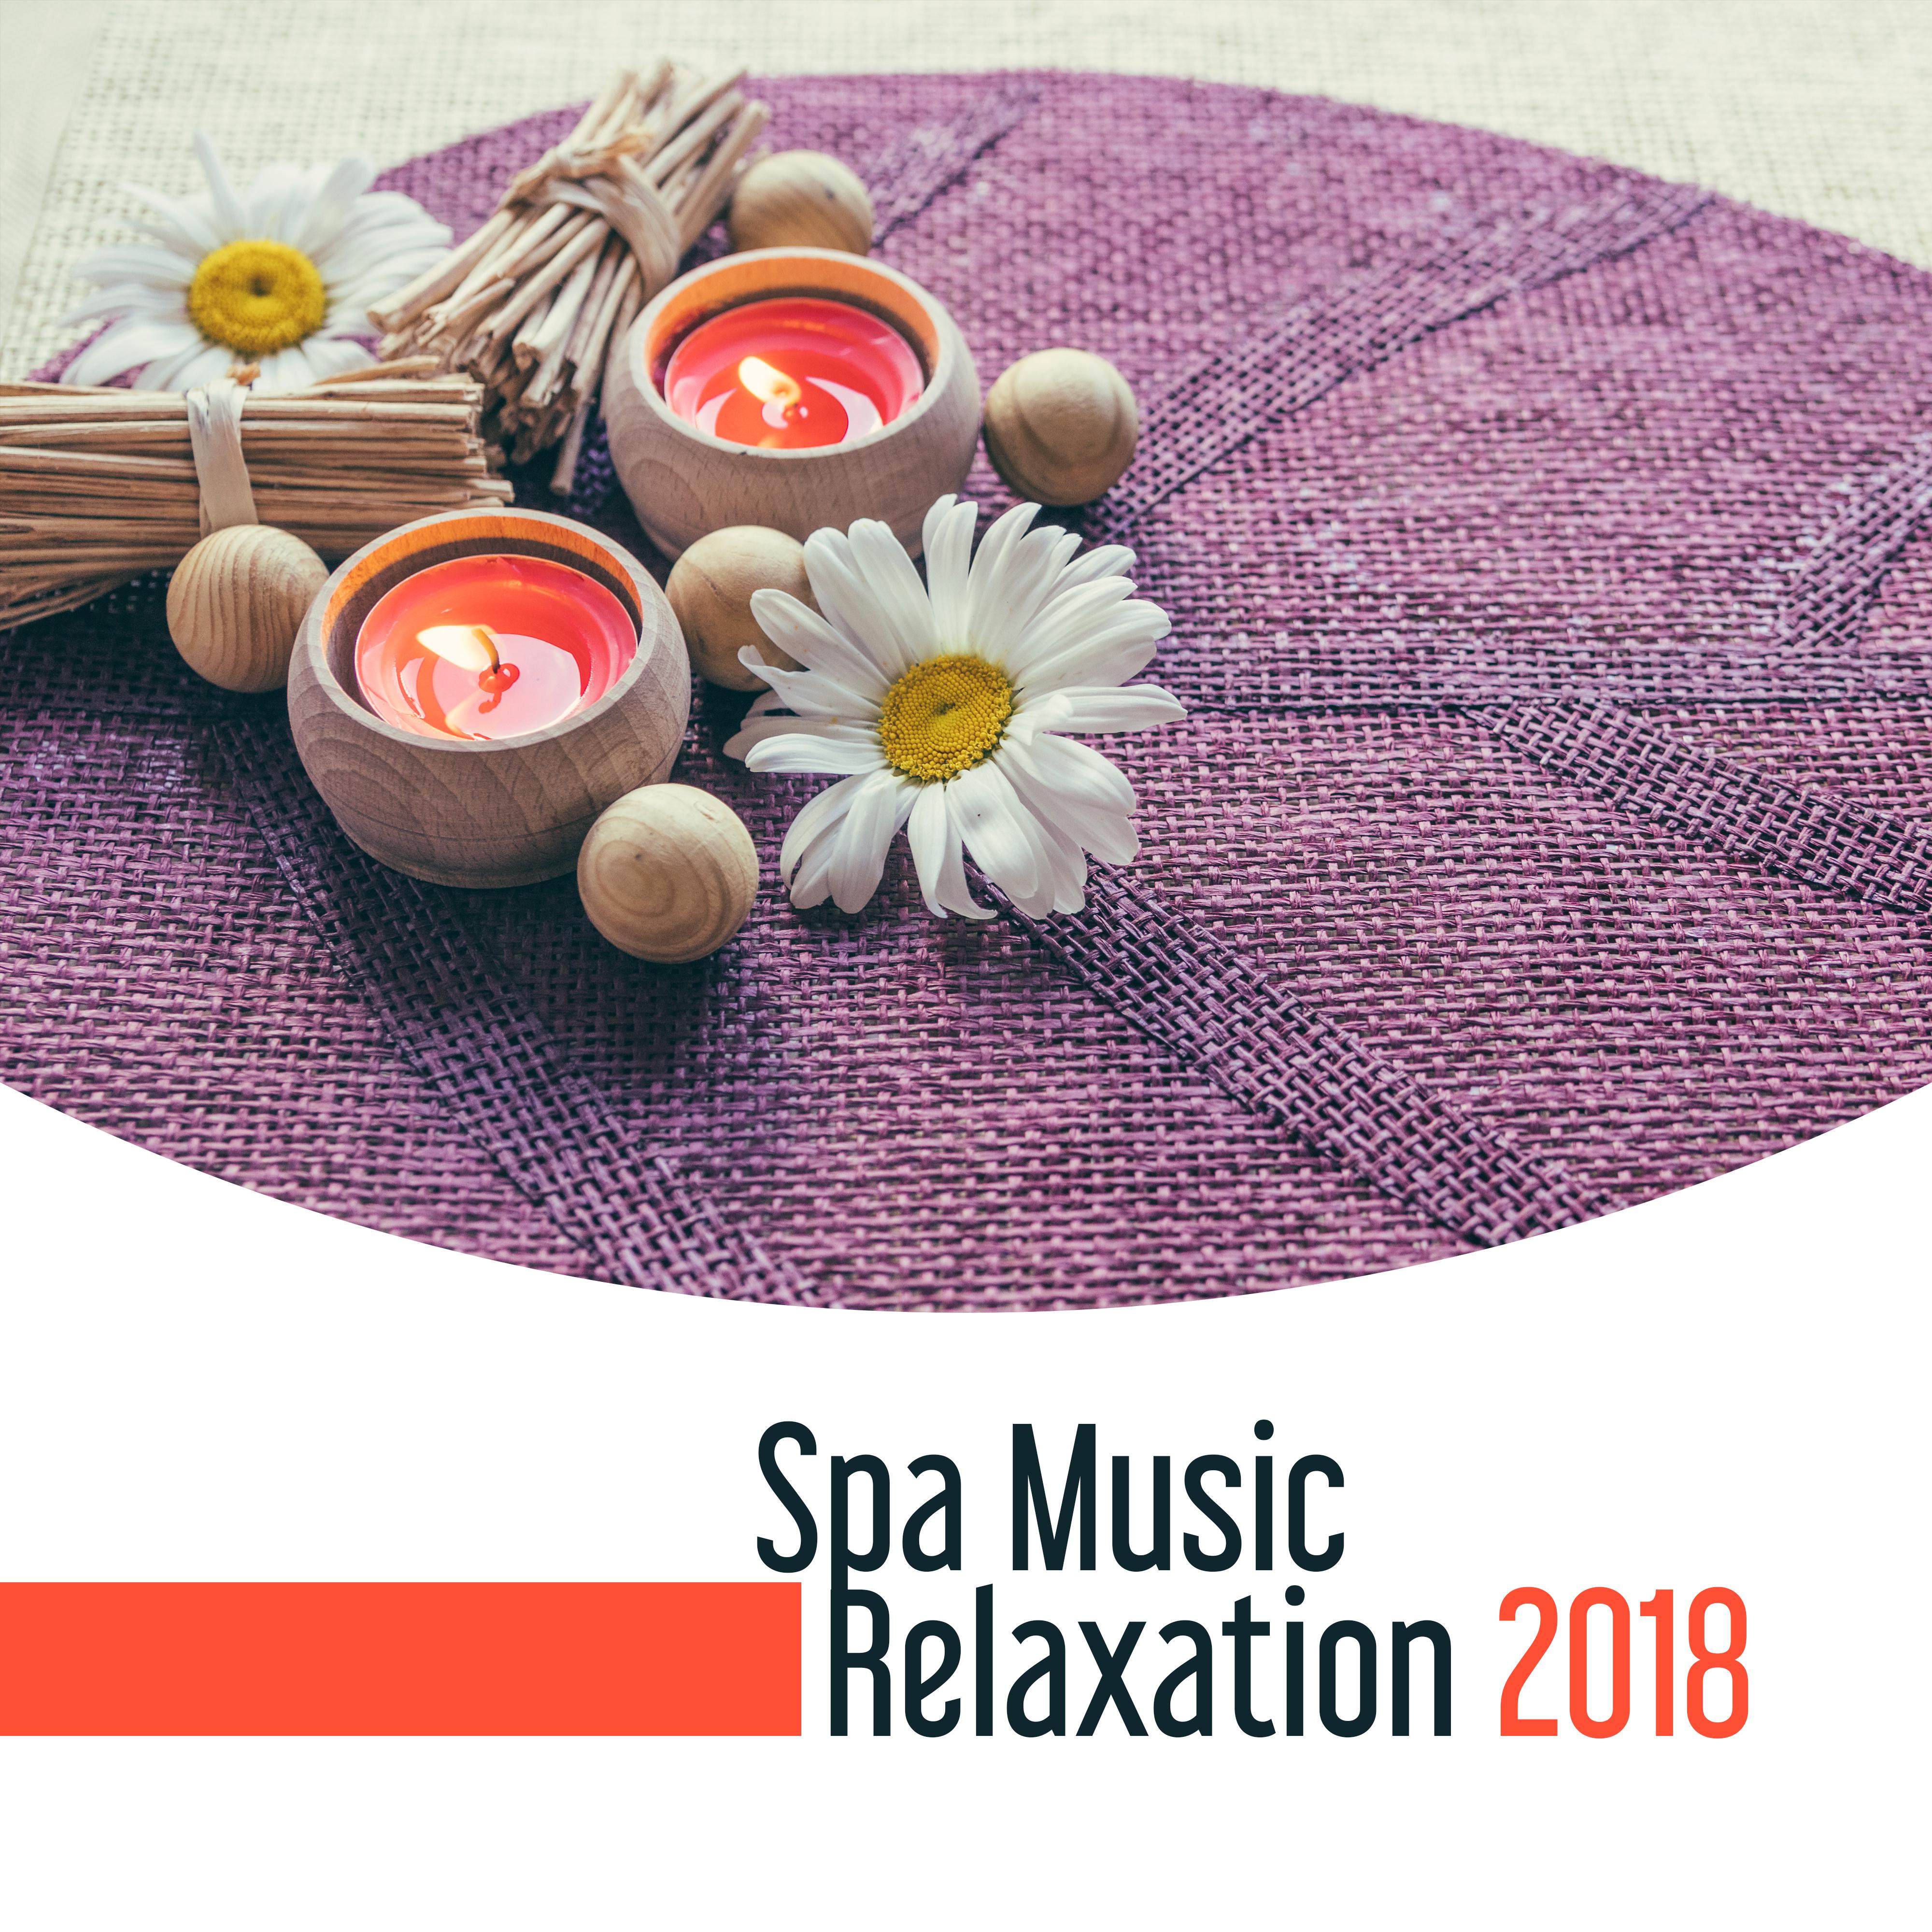 Spa Music Relaxation 2018